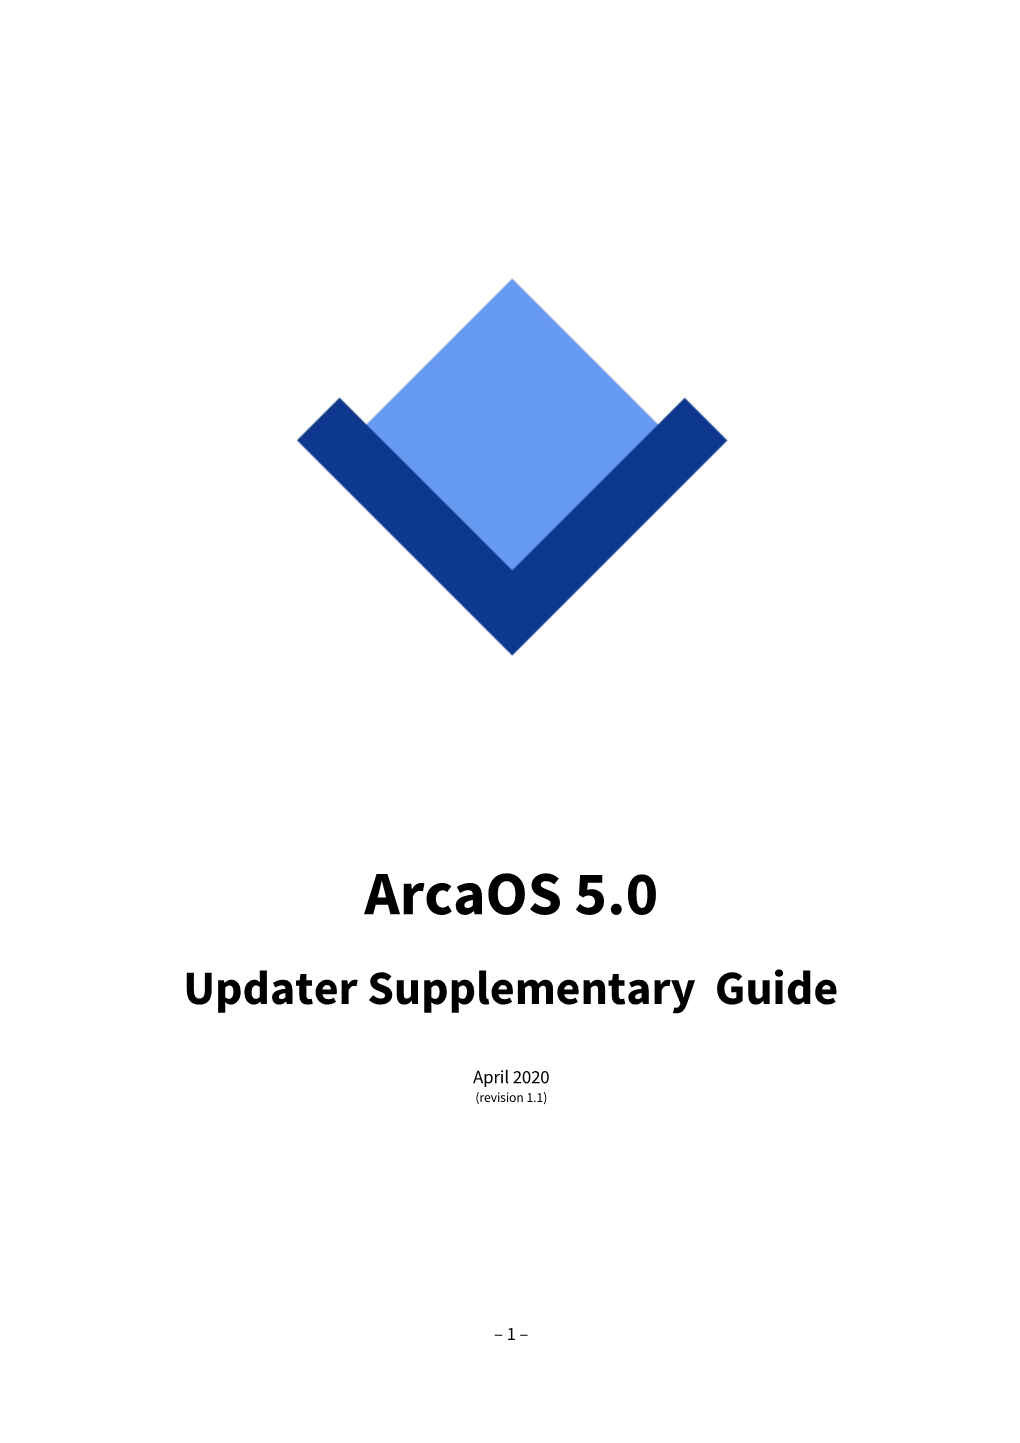 Arcaos 5.0 Updater Supplementary Guide